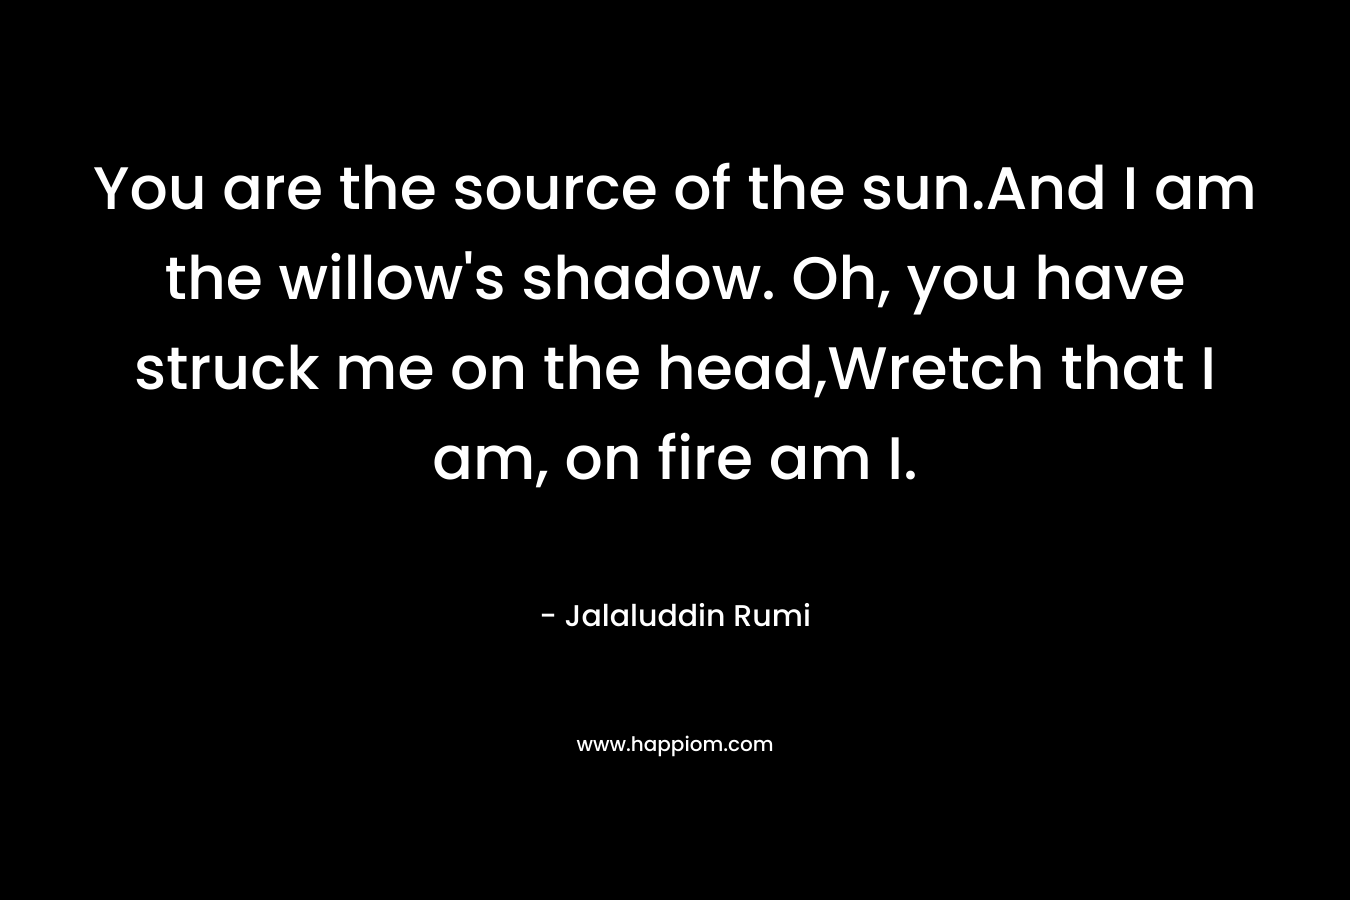 You are the source of the sun.And I am the willow’s shadow. Oh, you have struck me on the head,Wretch that I am, on fire am I. – Jalaluddin Rumi